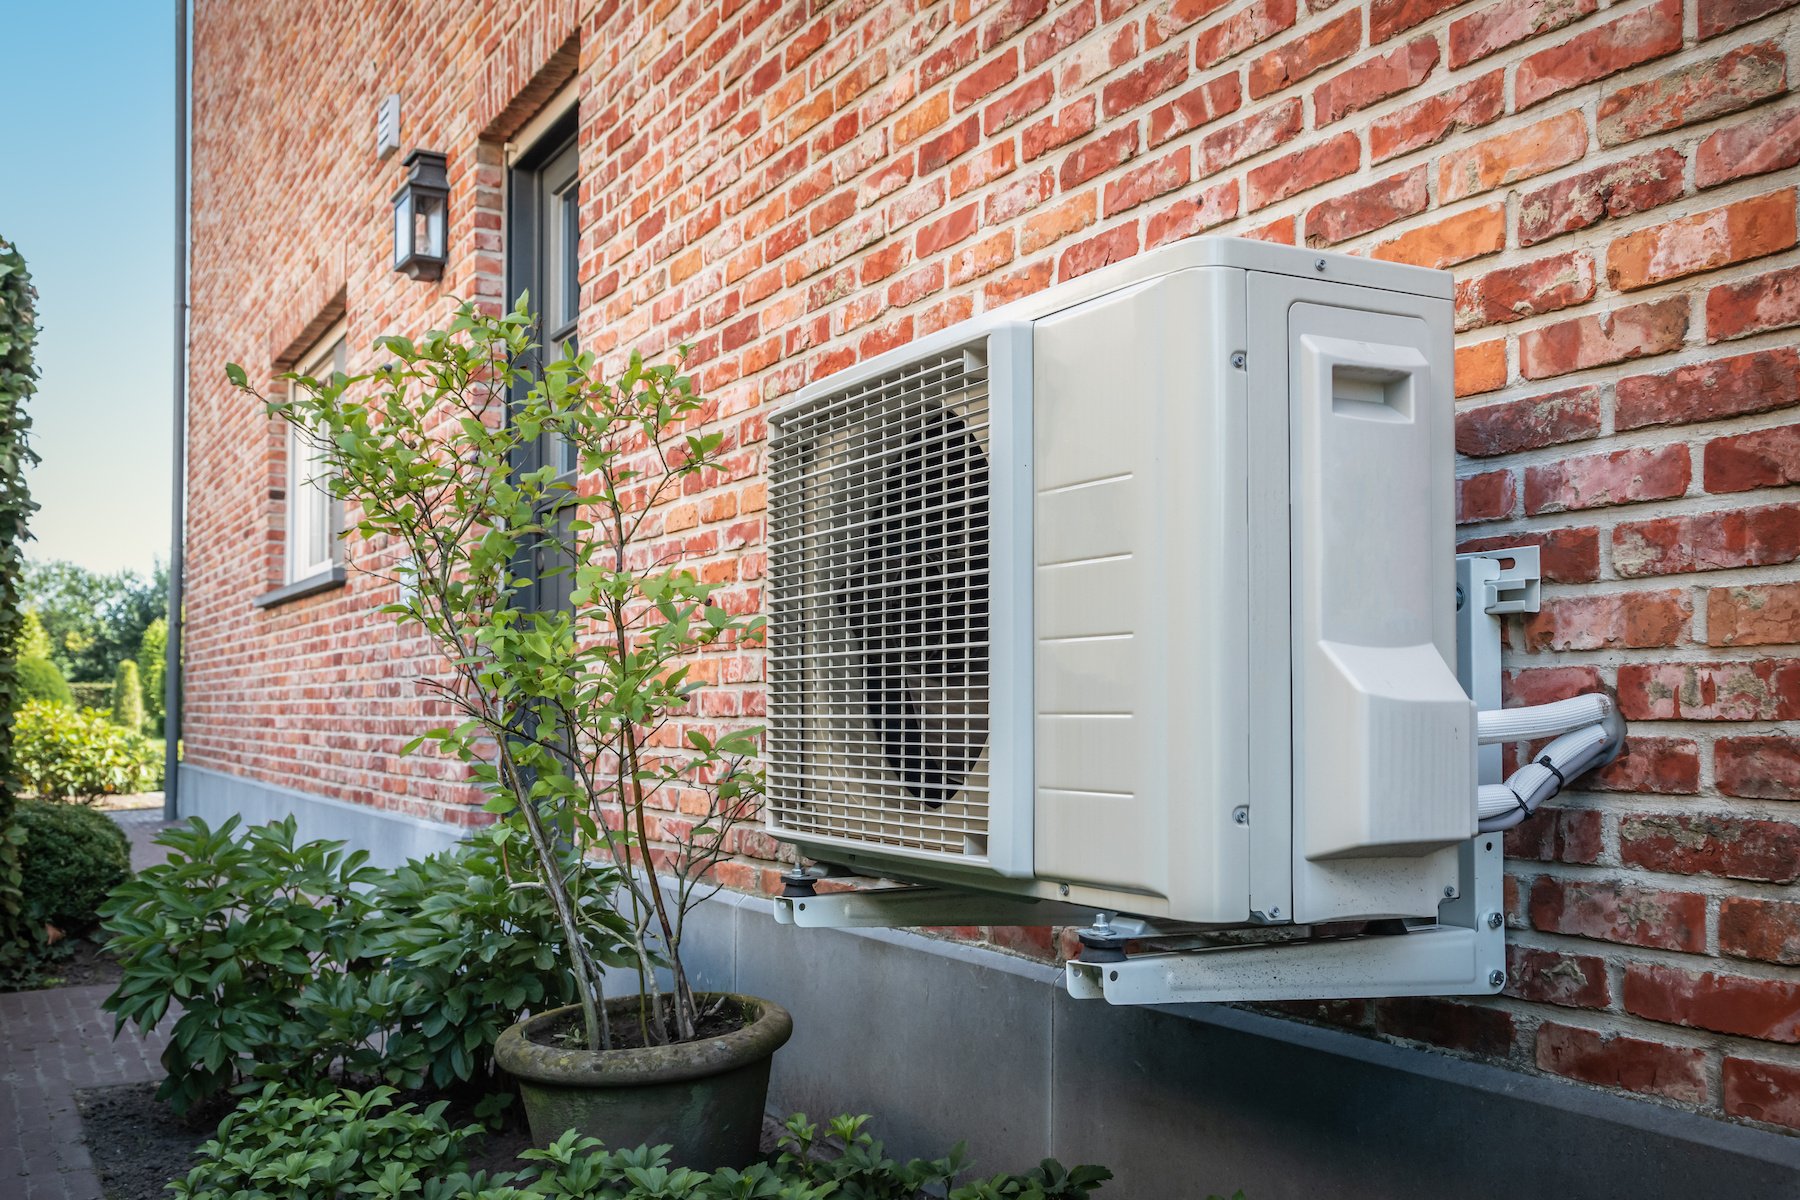 Air to air heat pump for cooling or heating the home. Outdoor unit powered by renewable energy.